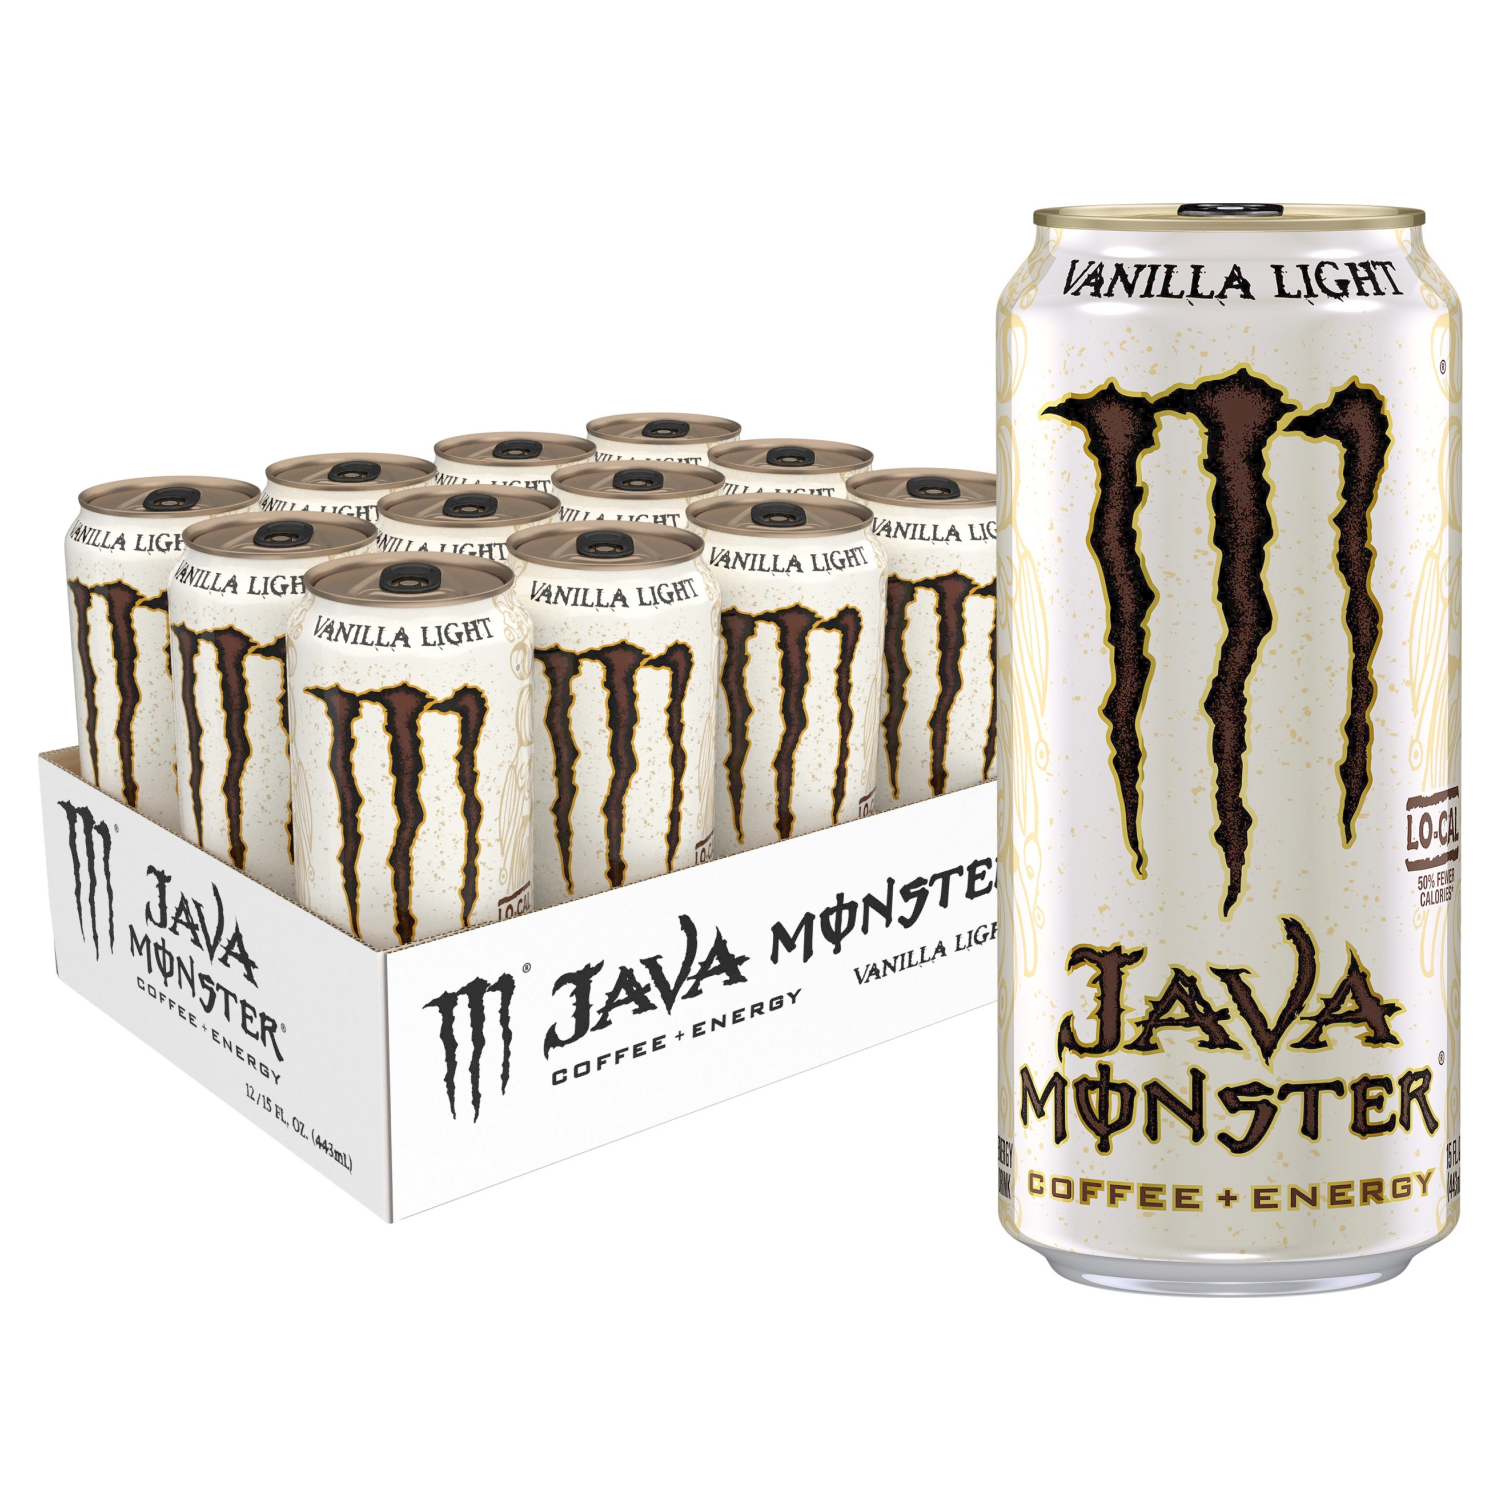 slide 1 of 5, Monster Energy How low can you go? Ounce for ounce Java Monster already has way less fat and calories than “Mega Bucks” bottled coffee. So why make Vanilla Light? Because our fearless leader is a health fanatic who counts calories like they're $100 dollar bills. Art vs. Science - Seriously, making a low calorie coffee + energy drink that tastes good and works, ain't that easy. Java Monster Vanilla Light sets a new standard for taste and effectiveness. Java Monster… premium coffee and cream brewed up with killer flavor, supercharged with Monster energy blend., 15 oz